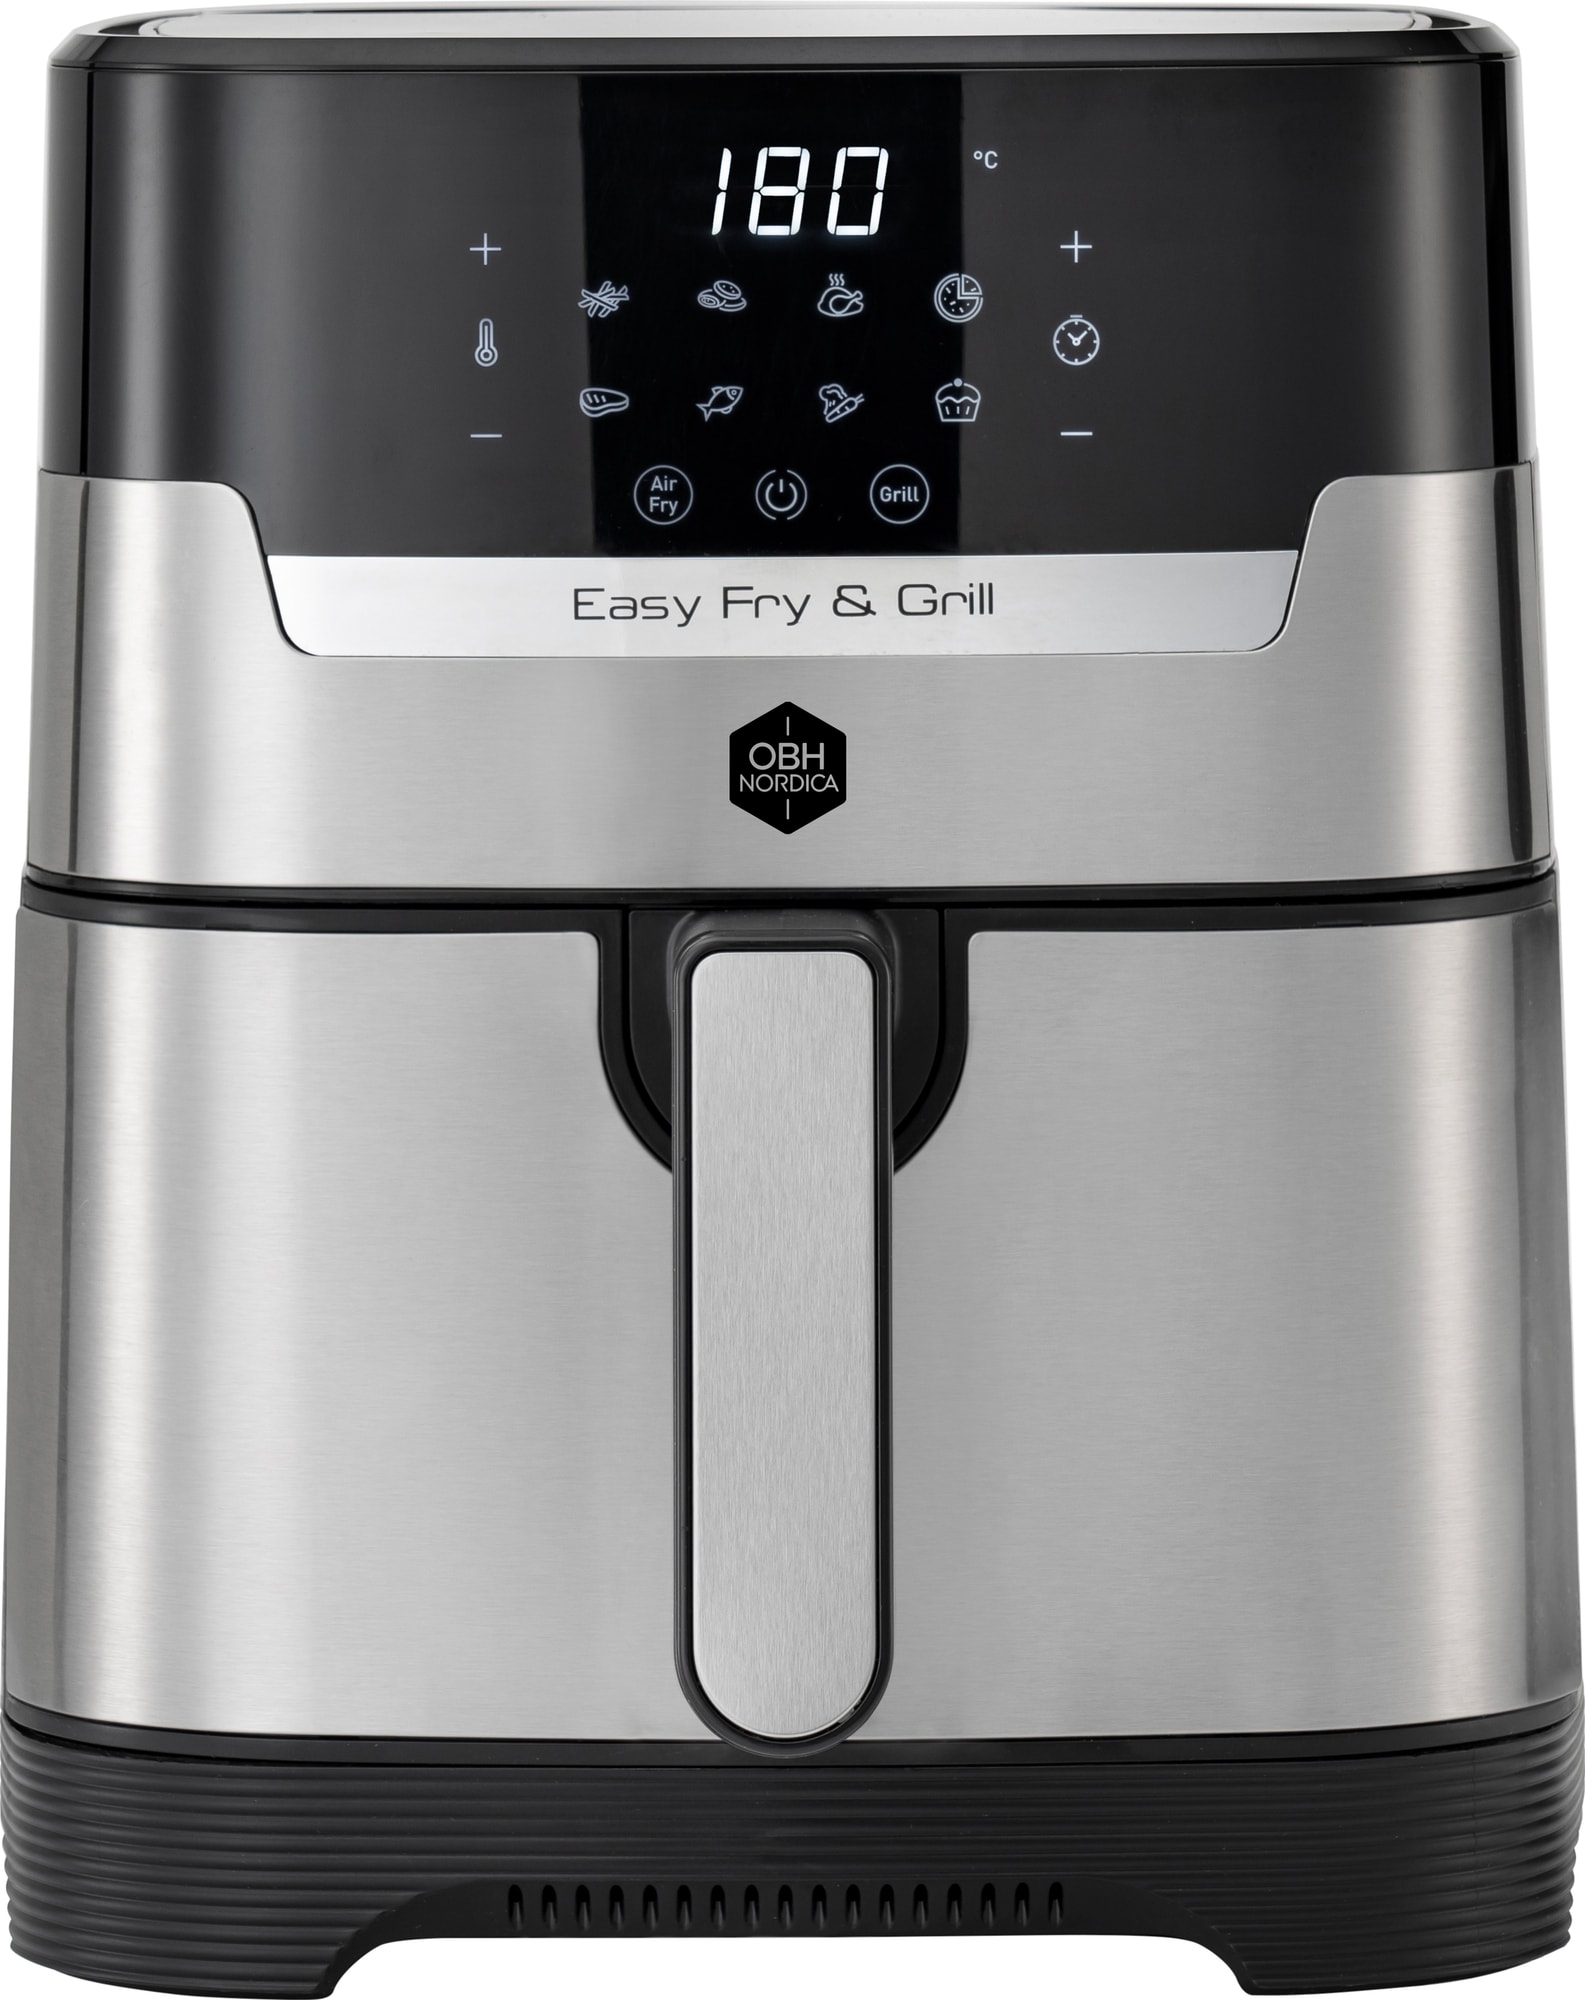 OBH Nordica Easy Fry PrecisionPlus airfryer thumbnail